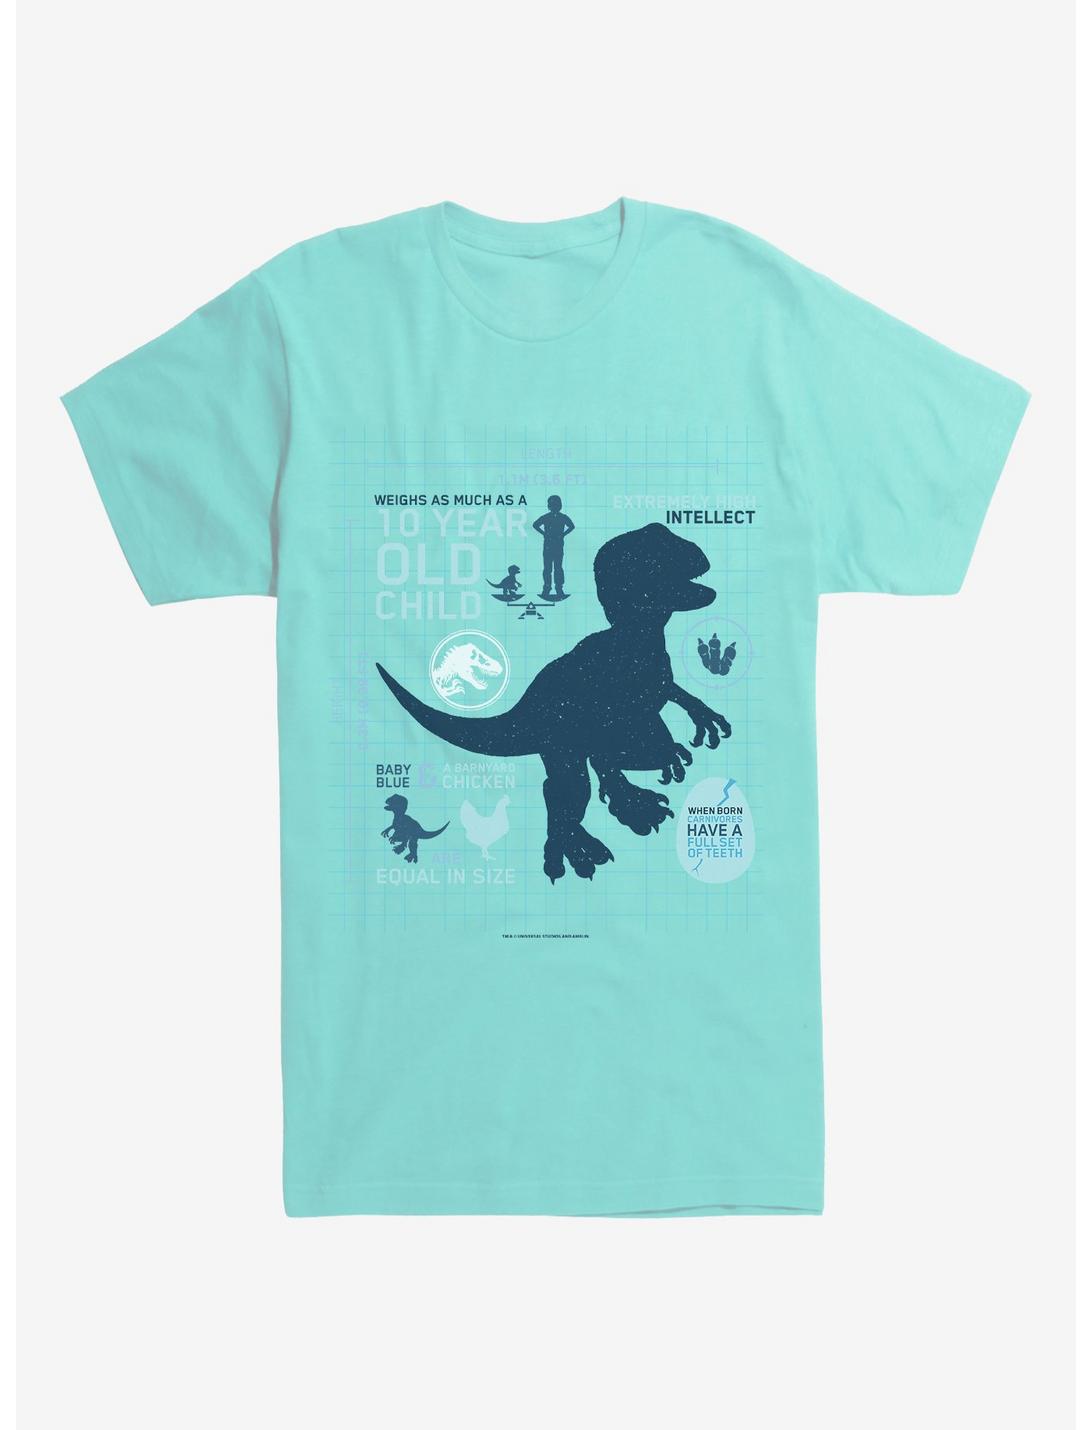 Jurassic World Did You Know T-Shirt, , hi-res